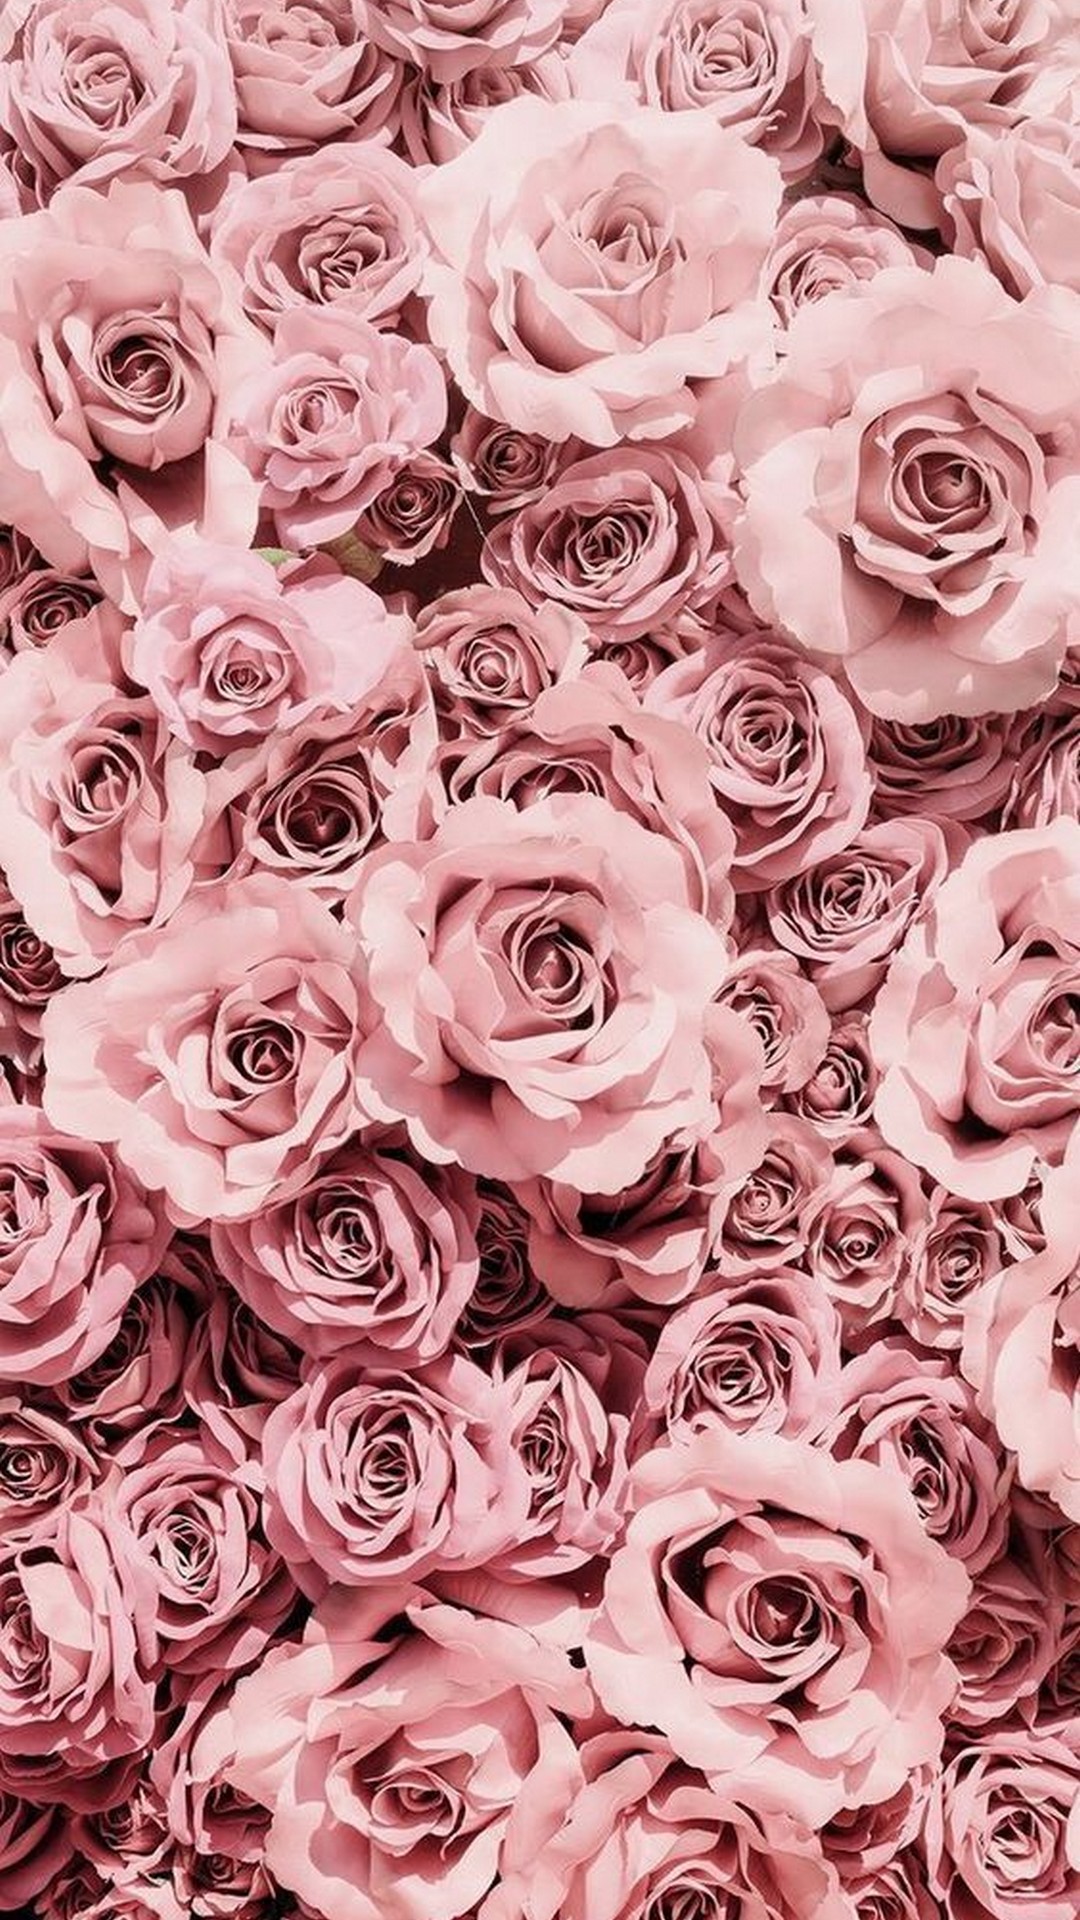 Rose Gold Aesthetic Android Wallpaper with high-resolution 1080x1920 pixel. You can use and set as wallpaper for Notebook Screensavers, Mac Wallpapers, Mobile Home Screen, iPhone or Android Phones Lock Screen